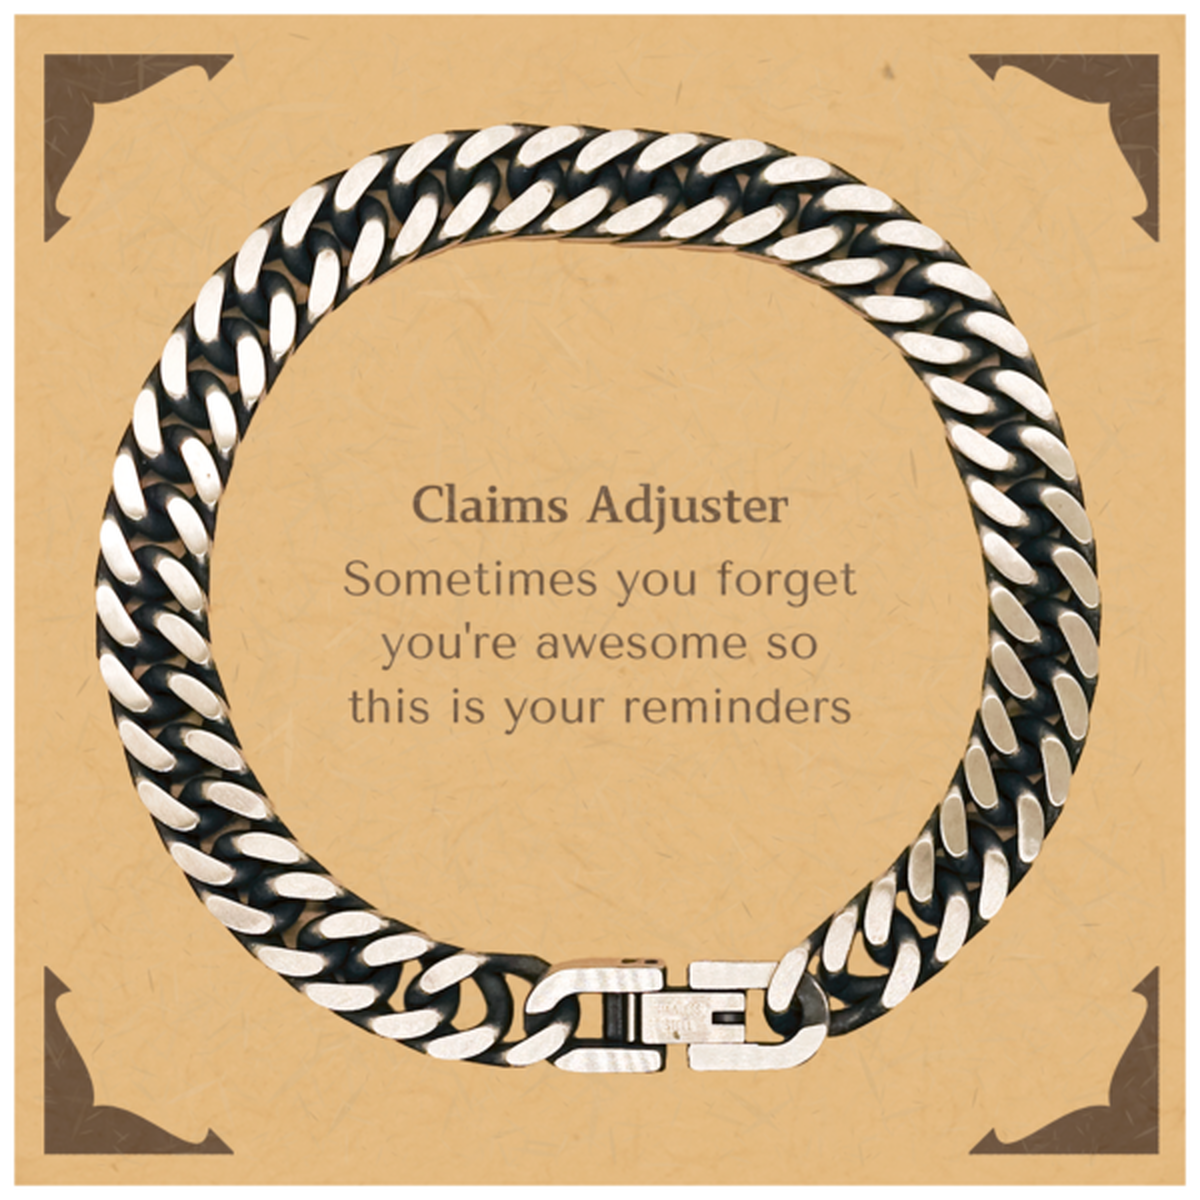 Sentimental Claims Adjuster Cuban Link Chain Bracelet, Claims Adjuster Sometimes you forget you're awesome so this is your reminders, Graduation Christmas Birthday Gifts for Claims Adjuster, Men, Women, Coworkers